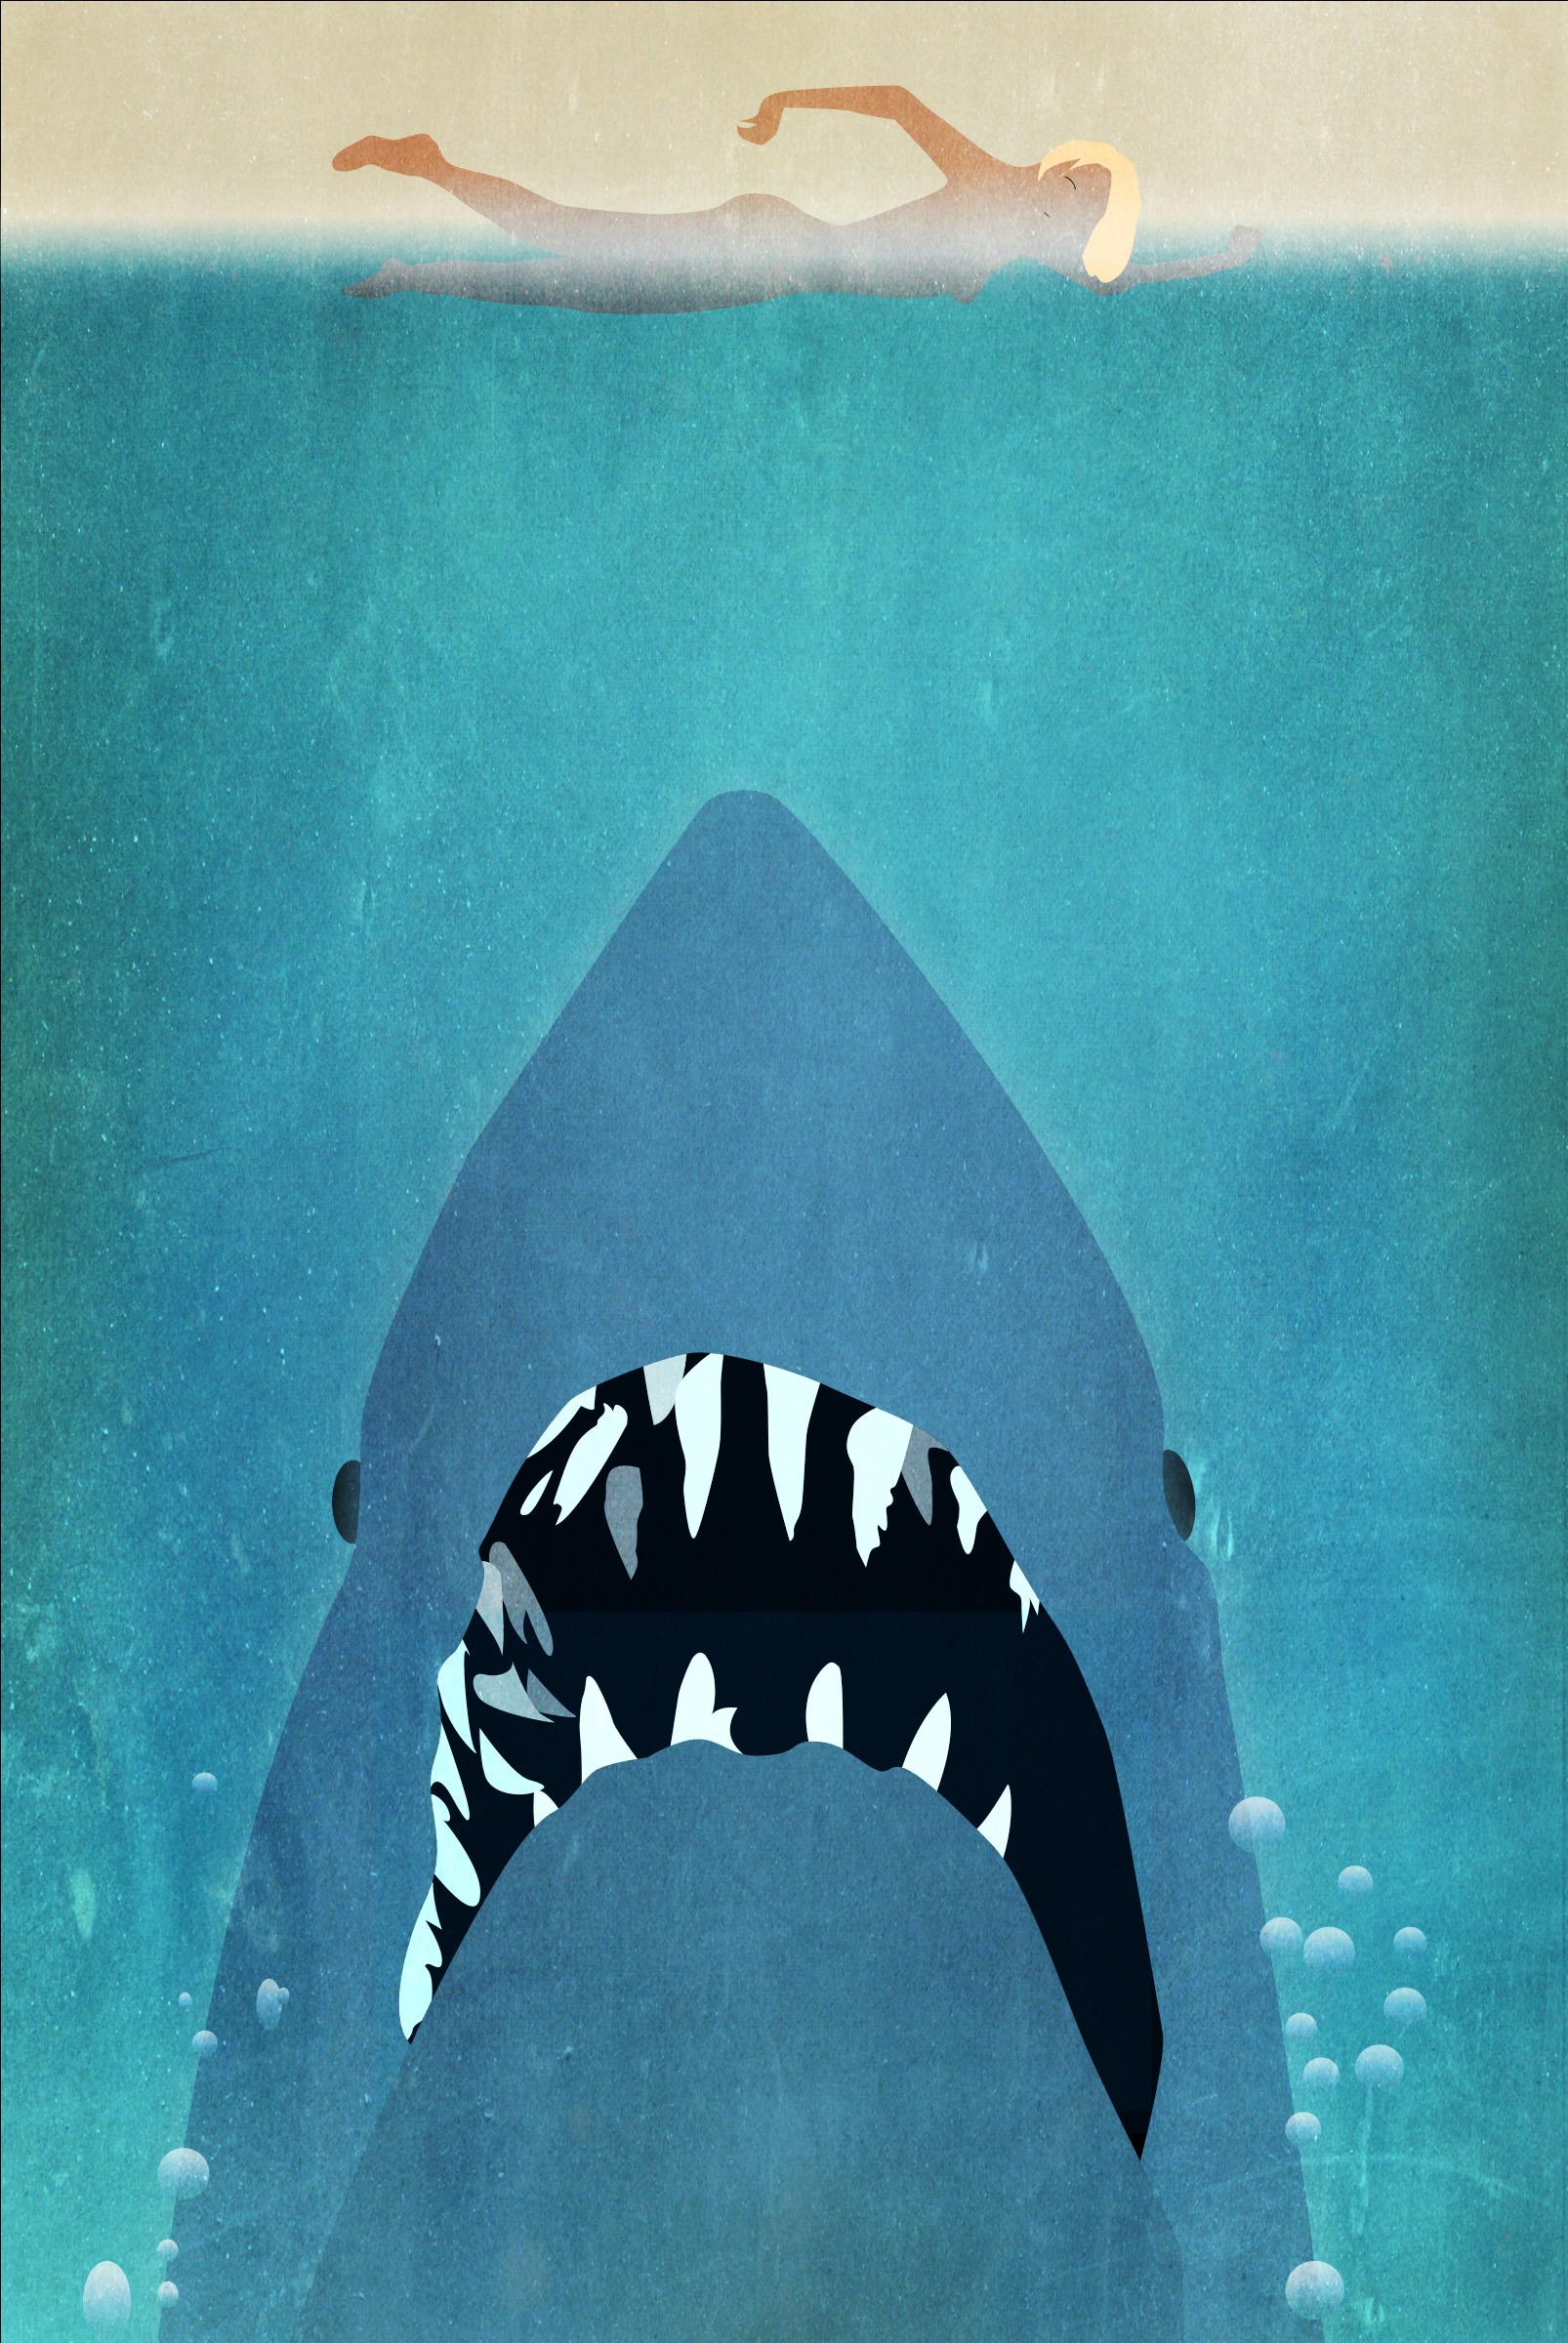 Vector illustration of the Jaws movie poster